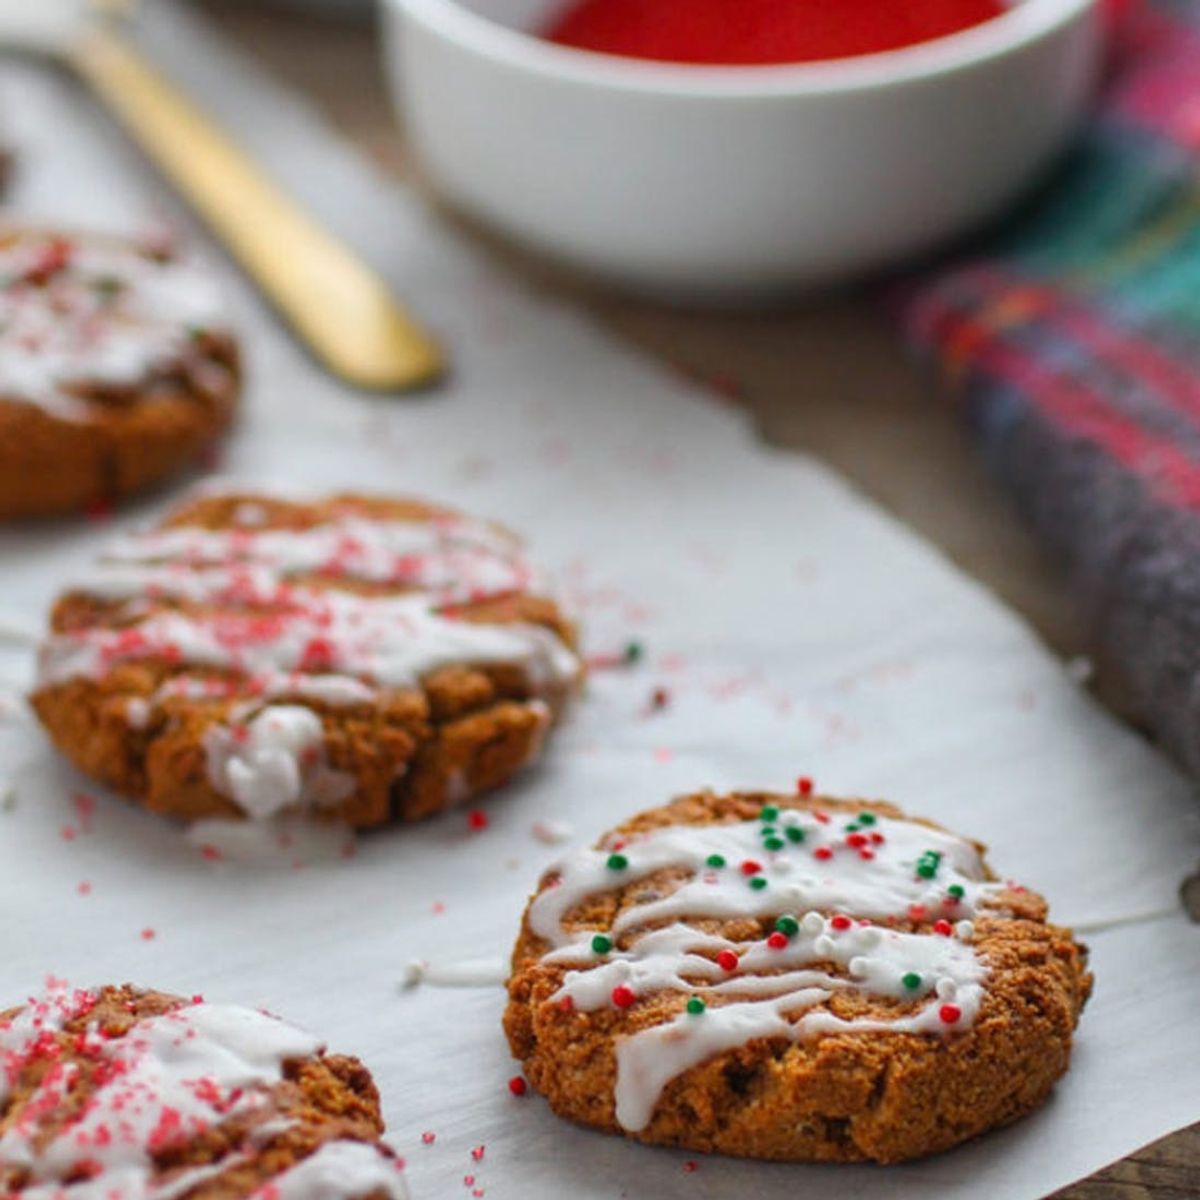 12 Healthy Holiday Recipes to Keep You on Track